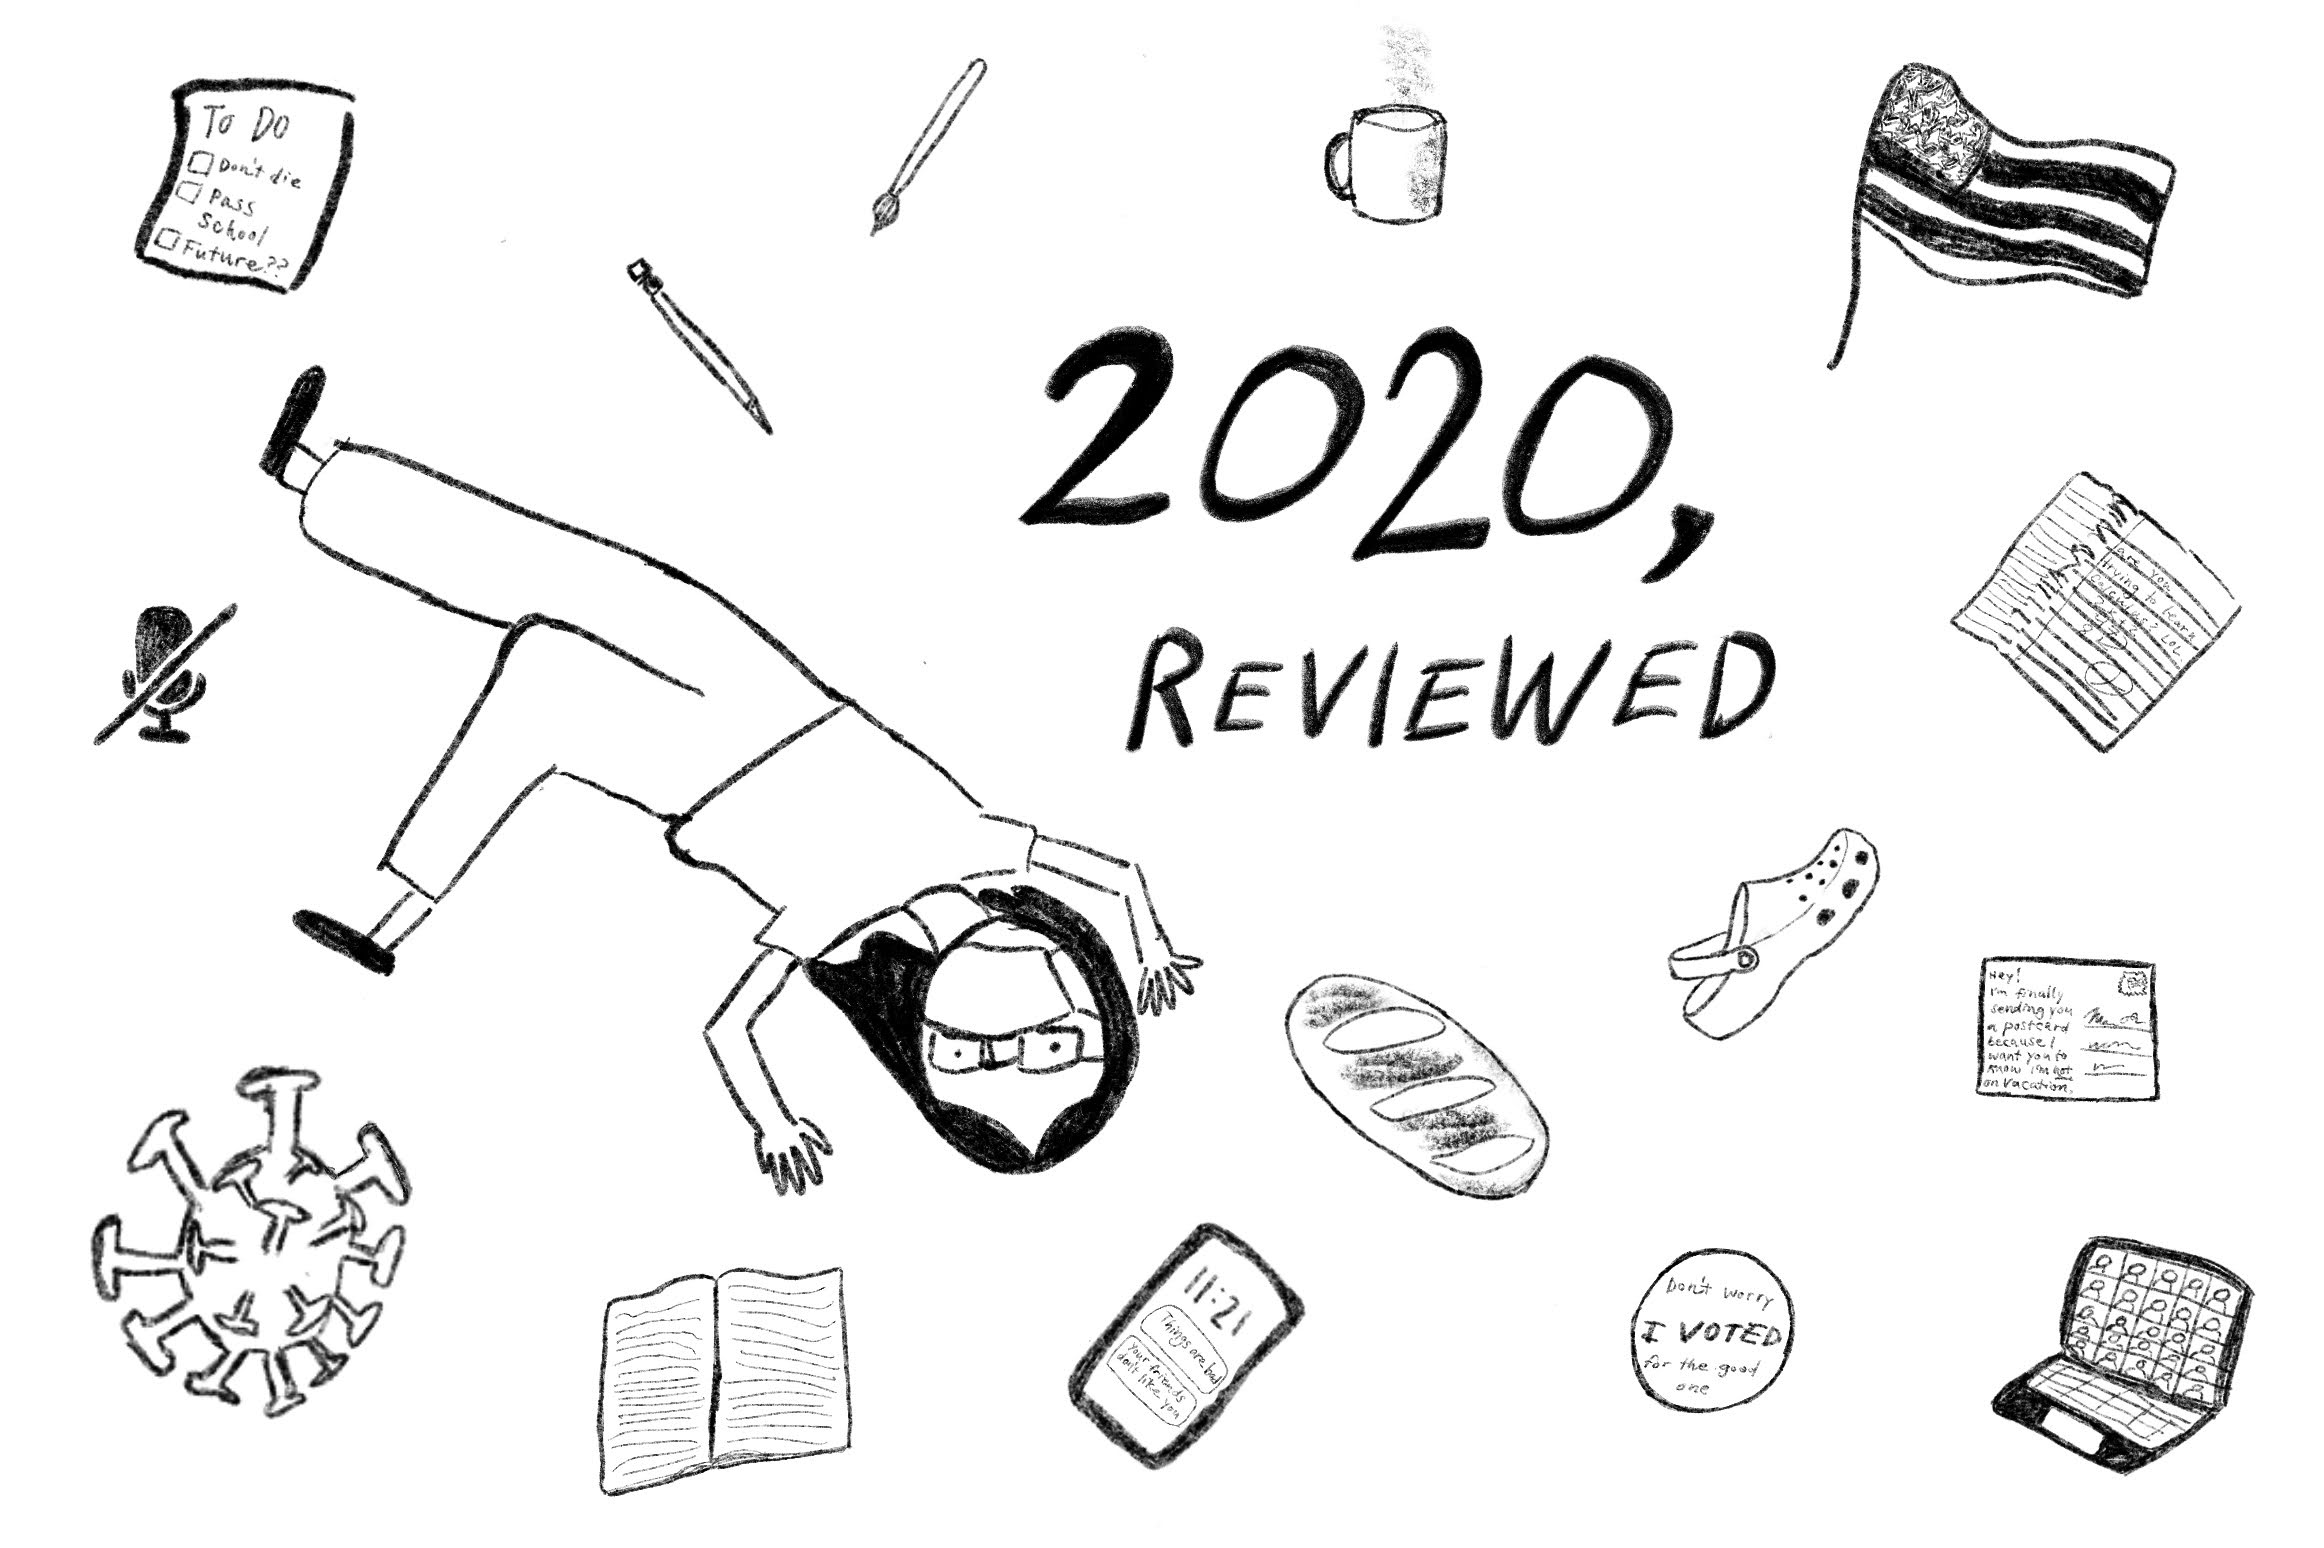 2020 reviewed article